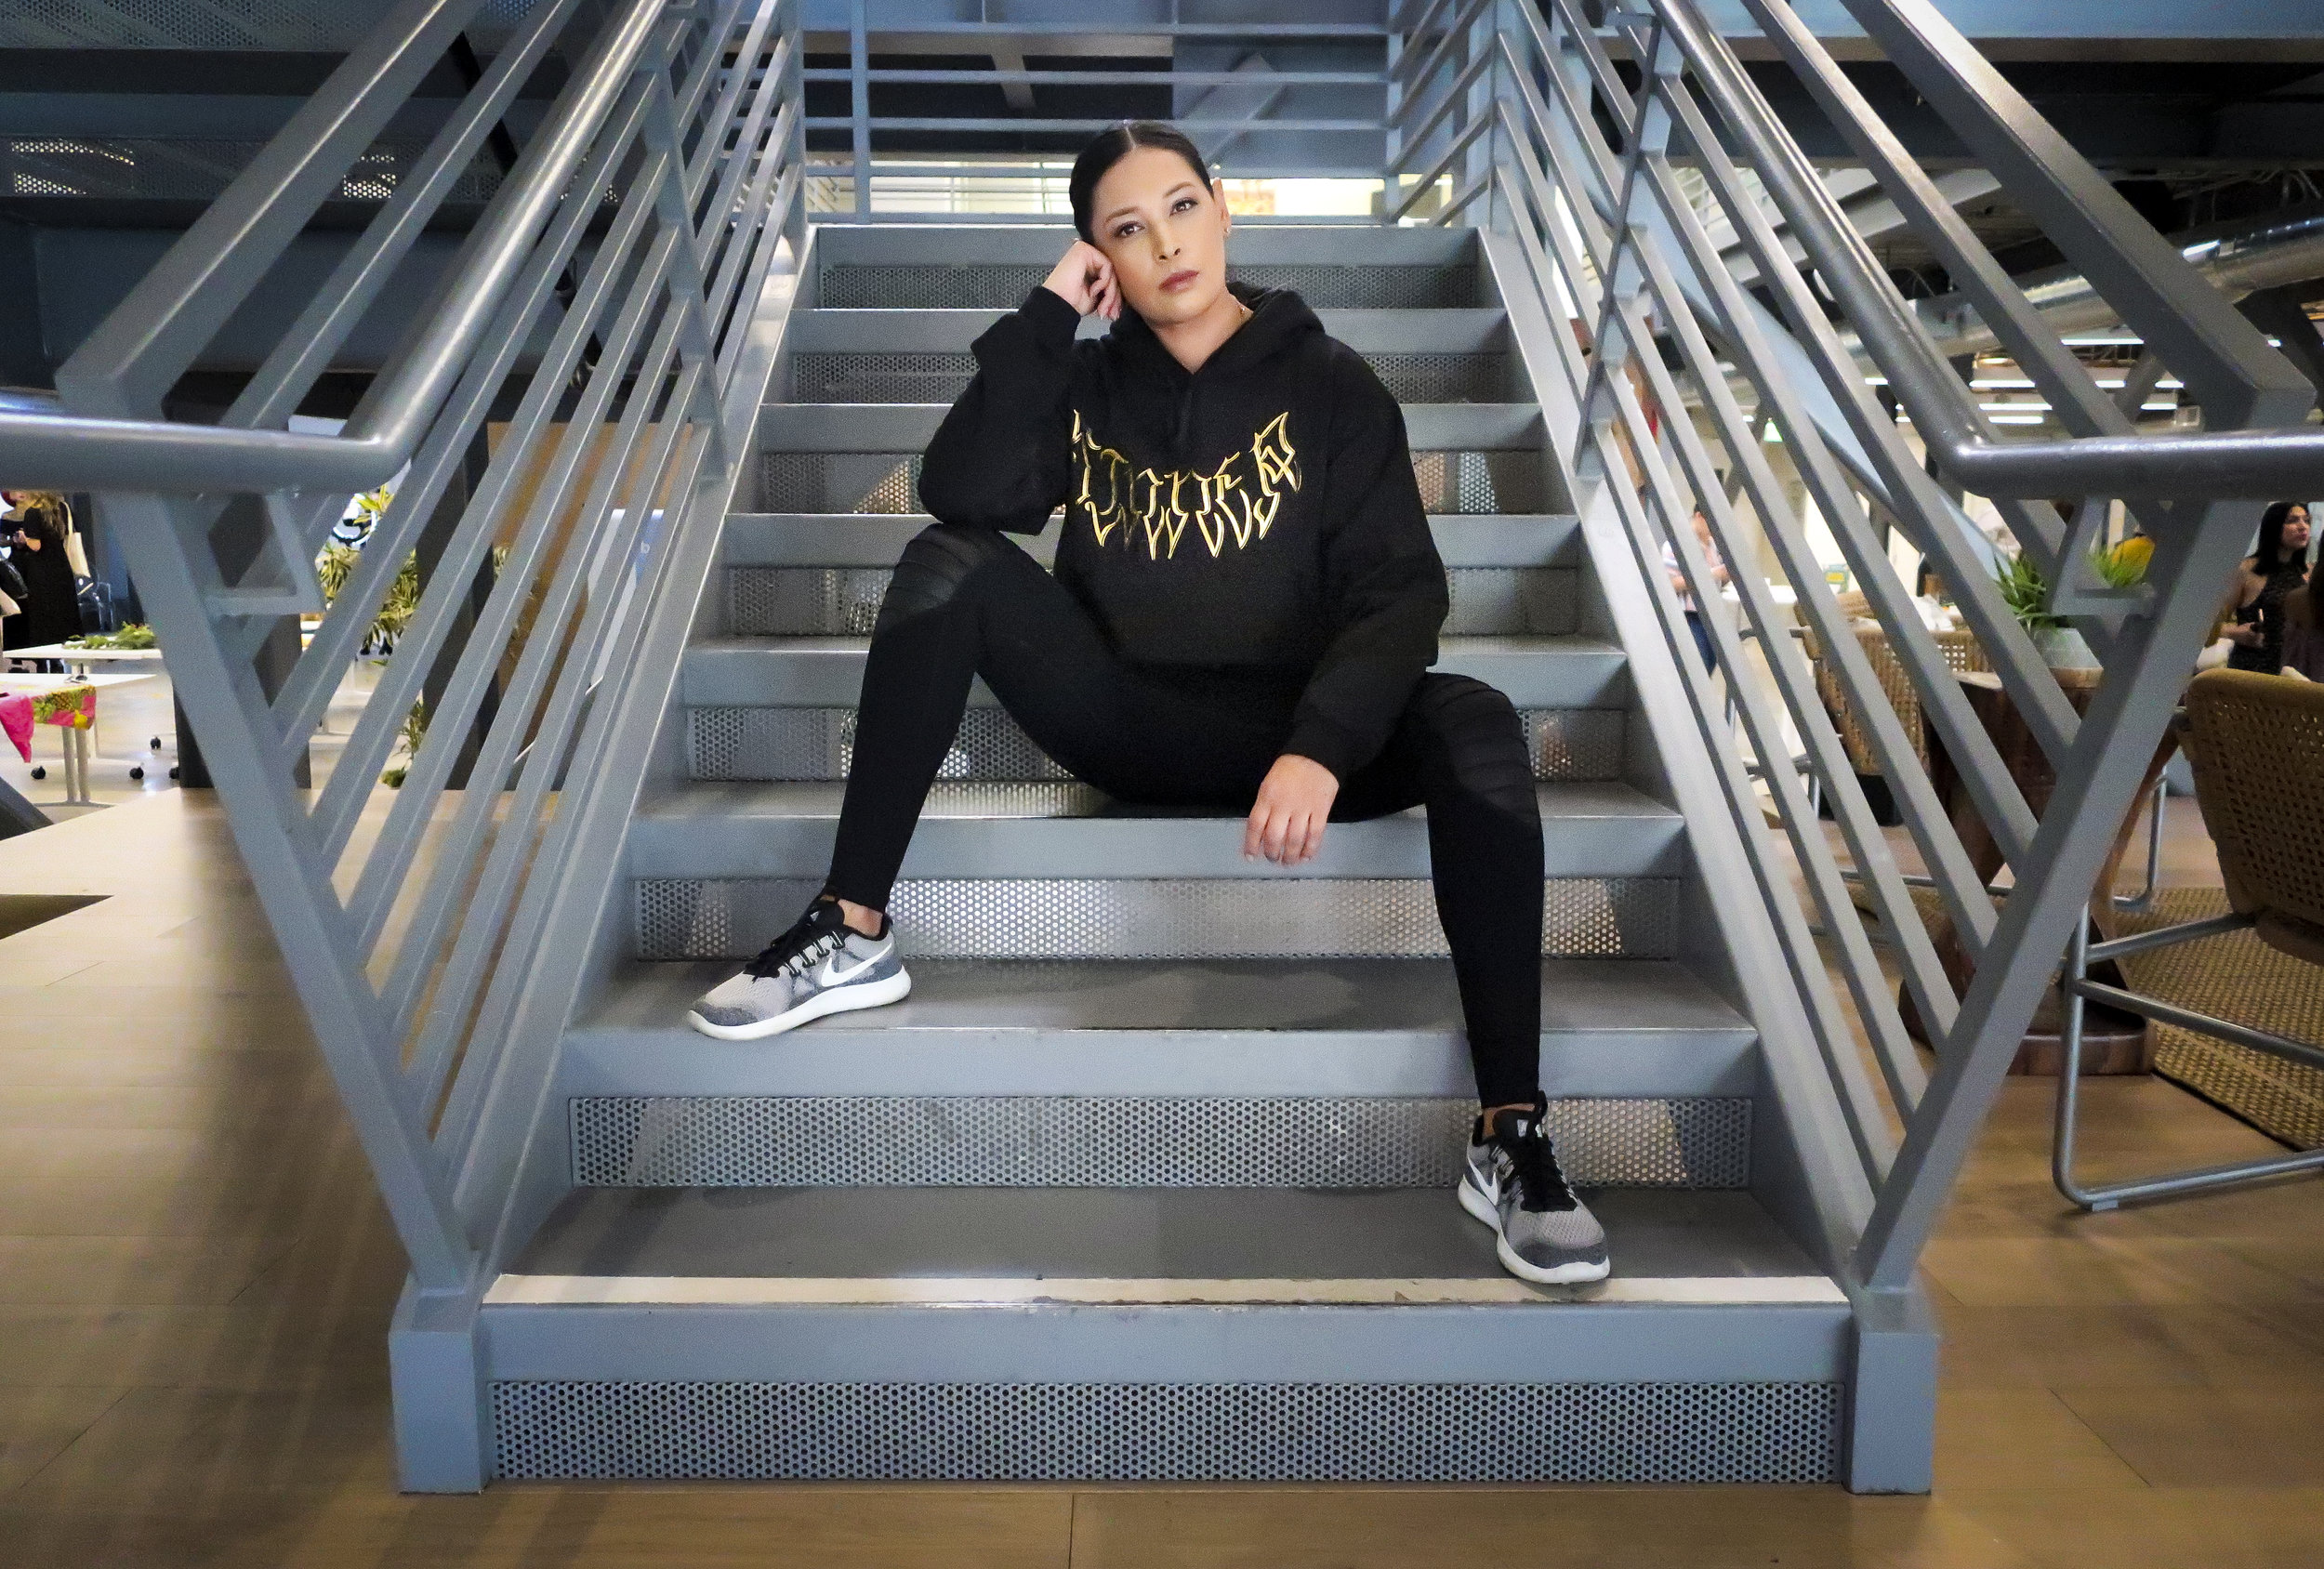 Betsy Correa wearing the SINNER Hoodie at The Spark Summit